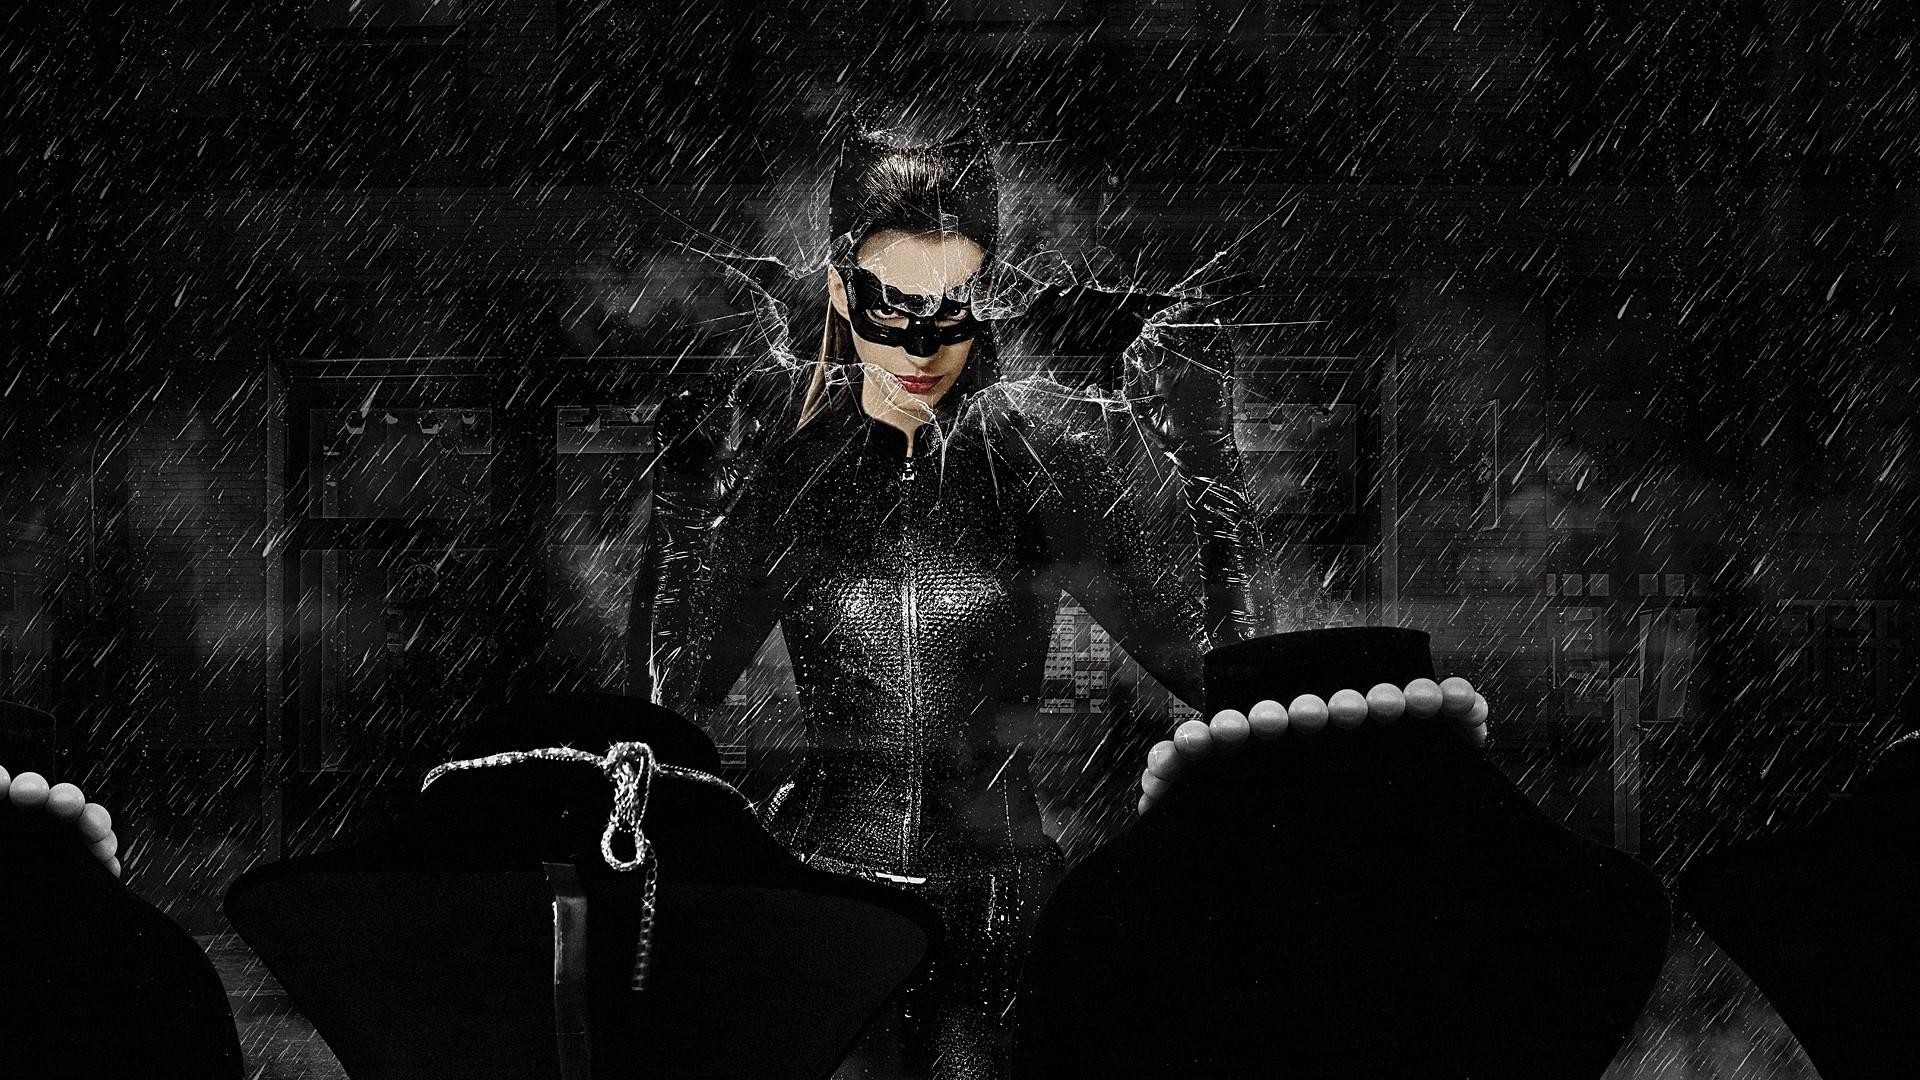 1920x1080 Anne Hathaway - Catwoman Wallpaper - 2